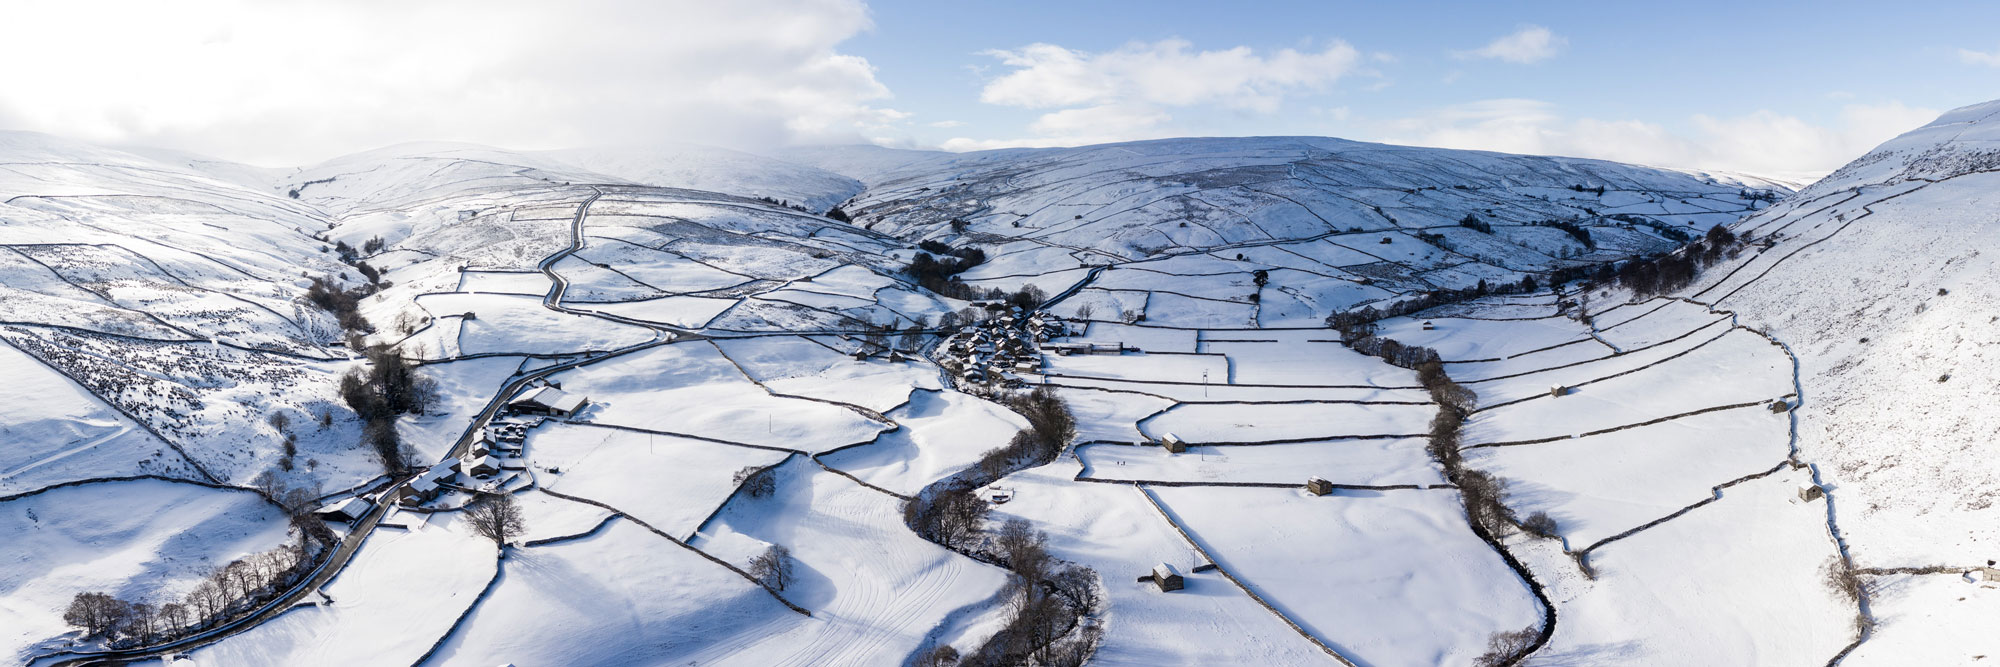 Thwaite and Swaledale feilde and barns covered in snow